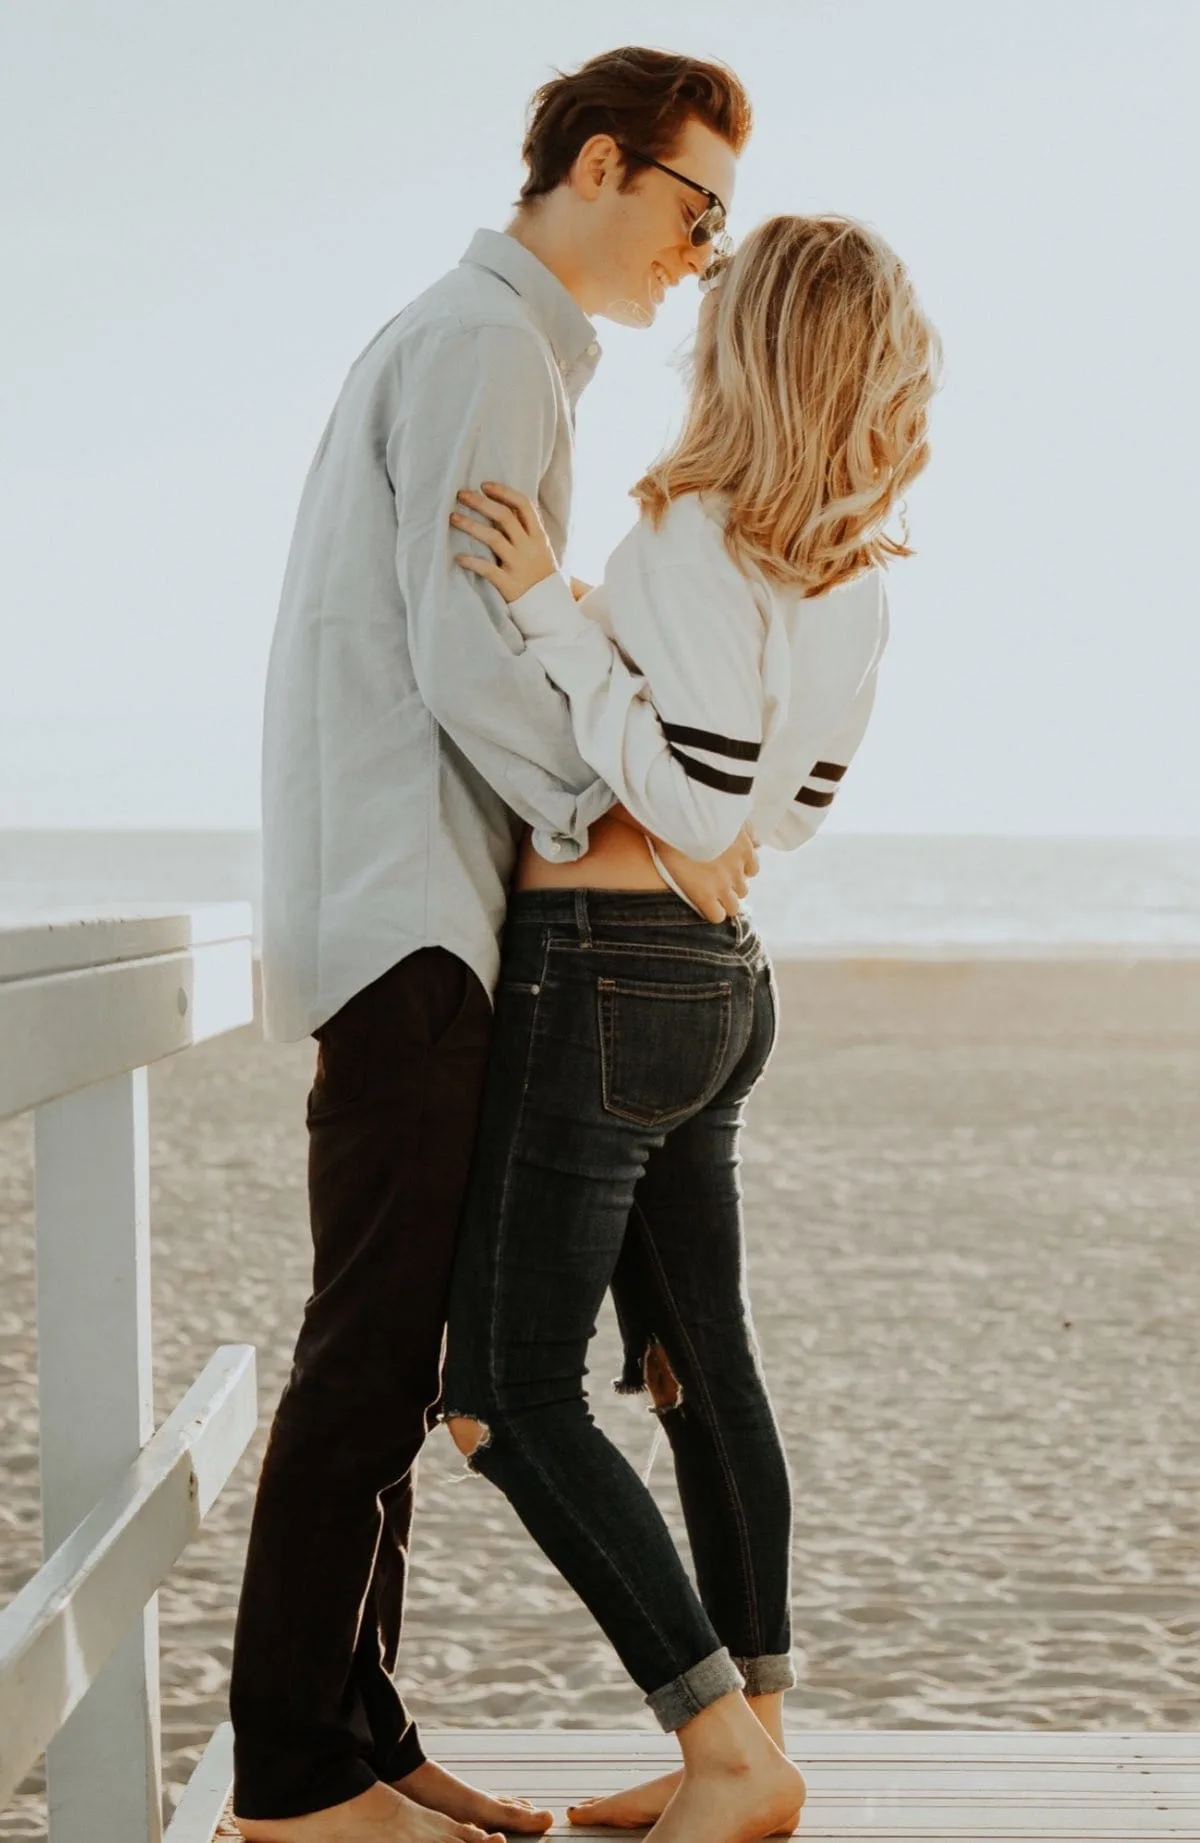 Creating a marriage that is happy, healthy, and thriving can sometimes feel like hard work. One way to help make your marriage stronger is to use affirmations for marriage. Here are 75 affirmations for marriage to help strengthen and empower your relationship.